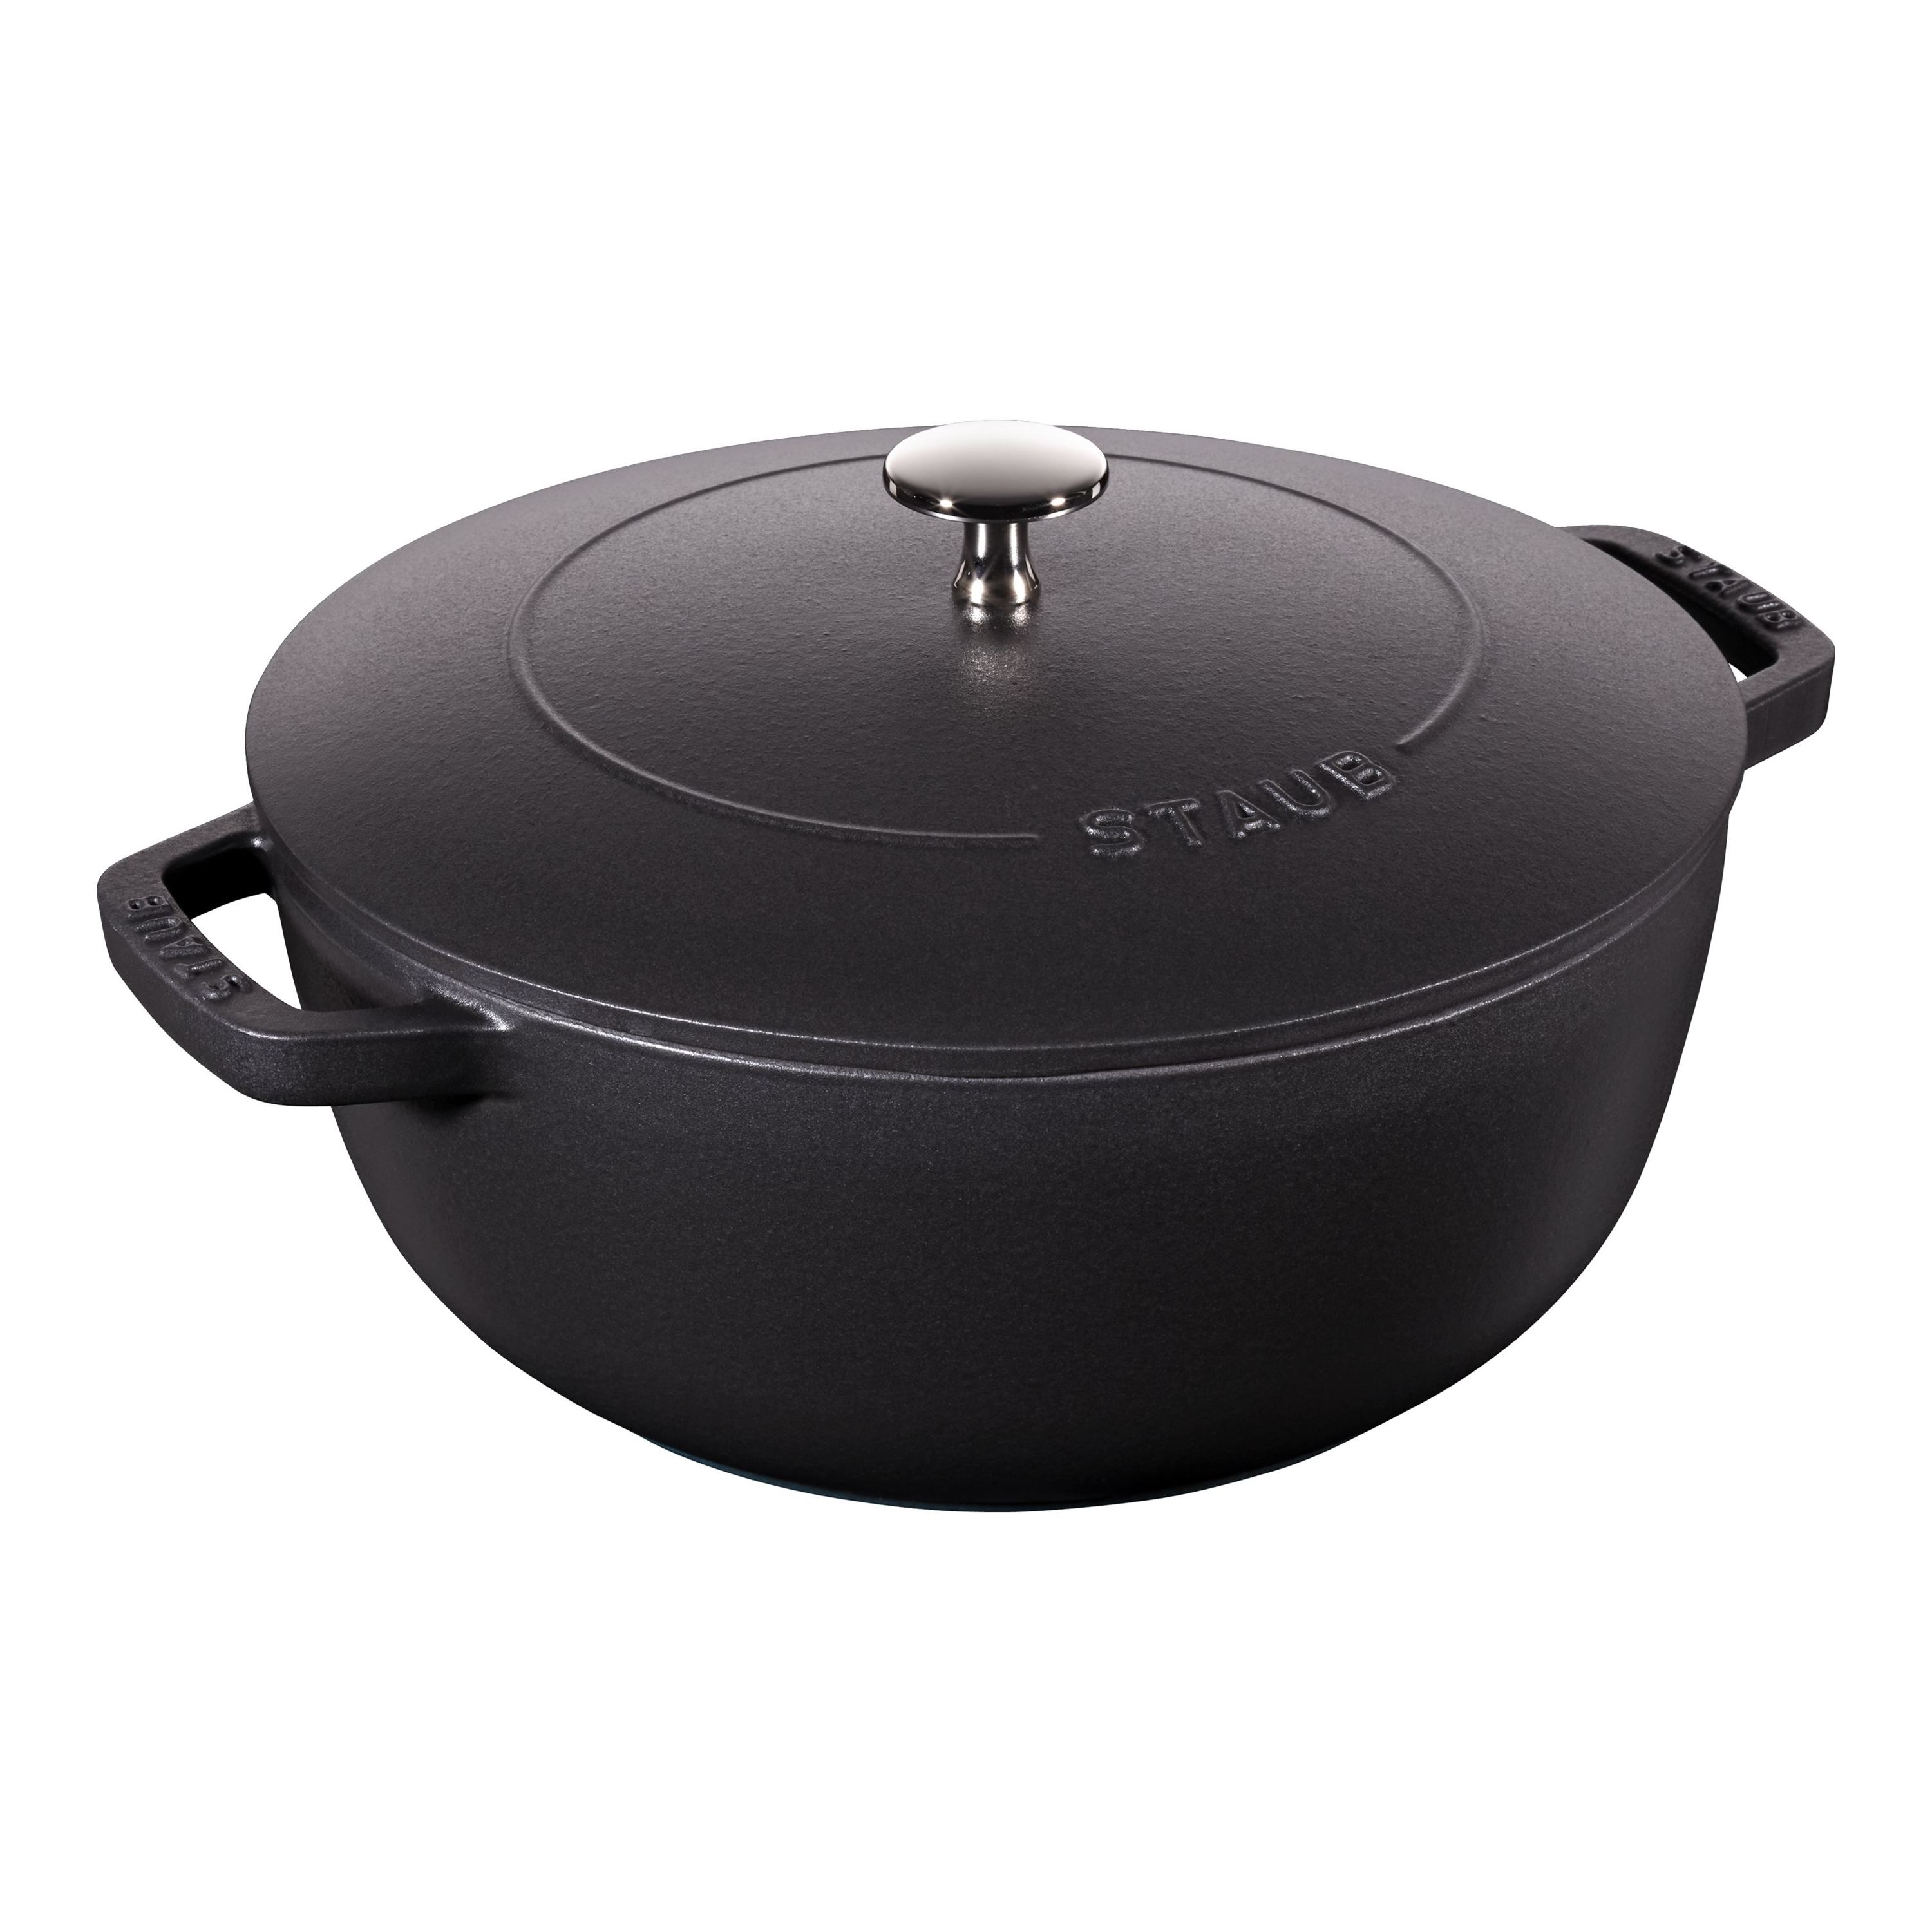 Fundamental Cookware for Starters: The Dutch Oven